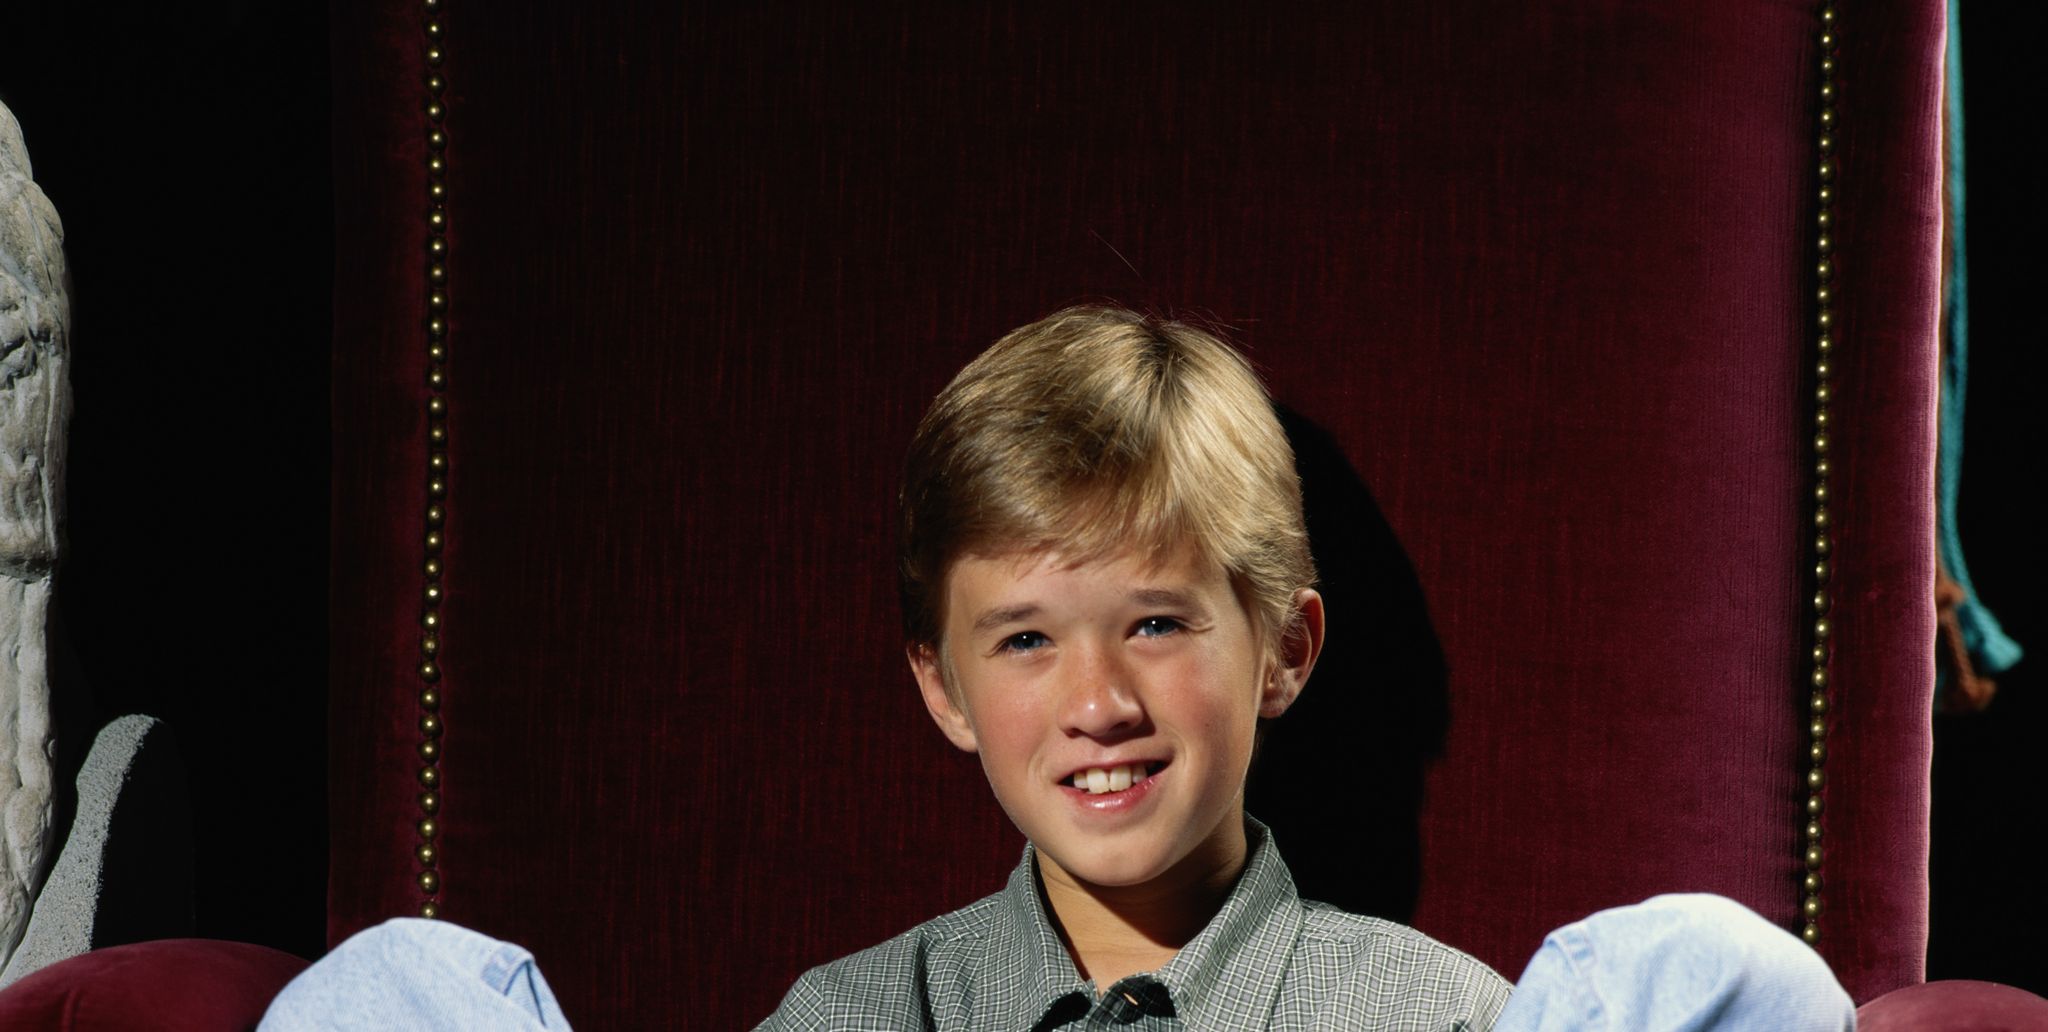 american child actor haley joel osment, circa 2000 he was nominated for an academy award for his role in the 1999 film the sixth sense photo by maureen donaldsongetty images